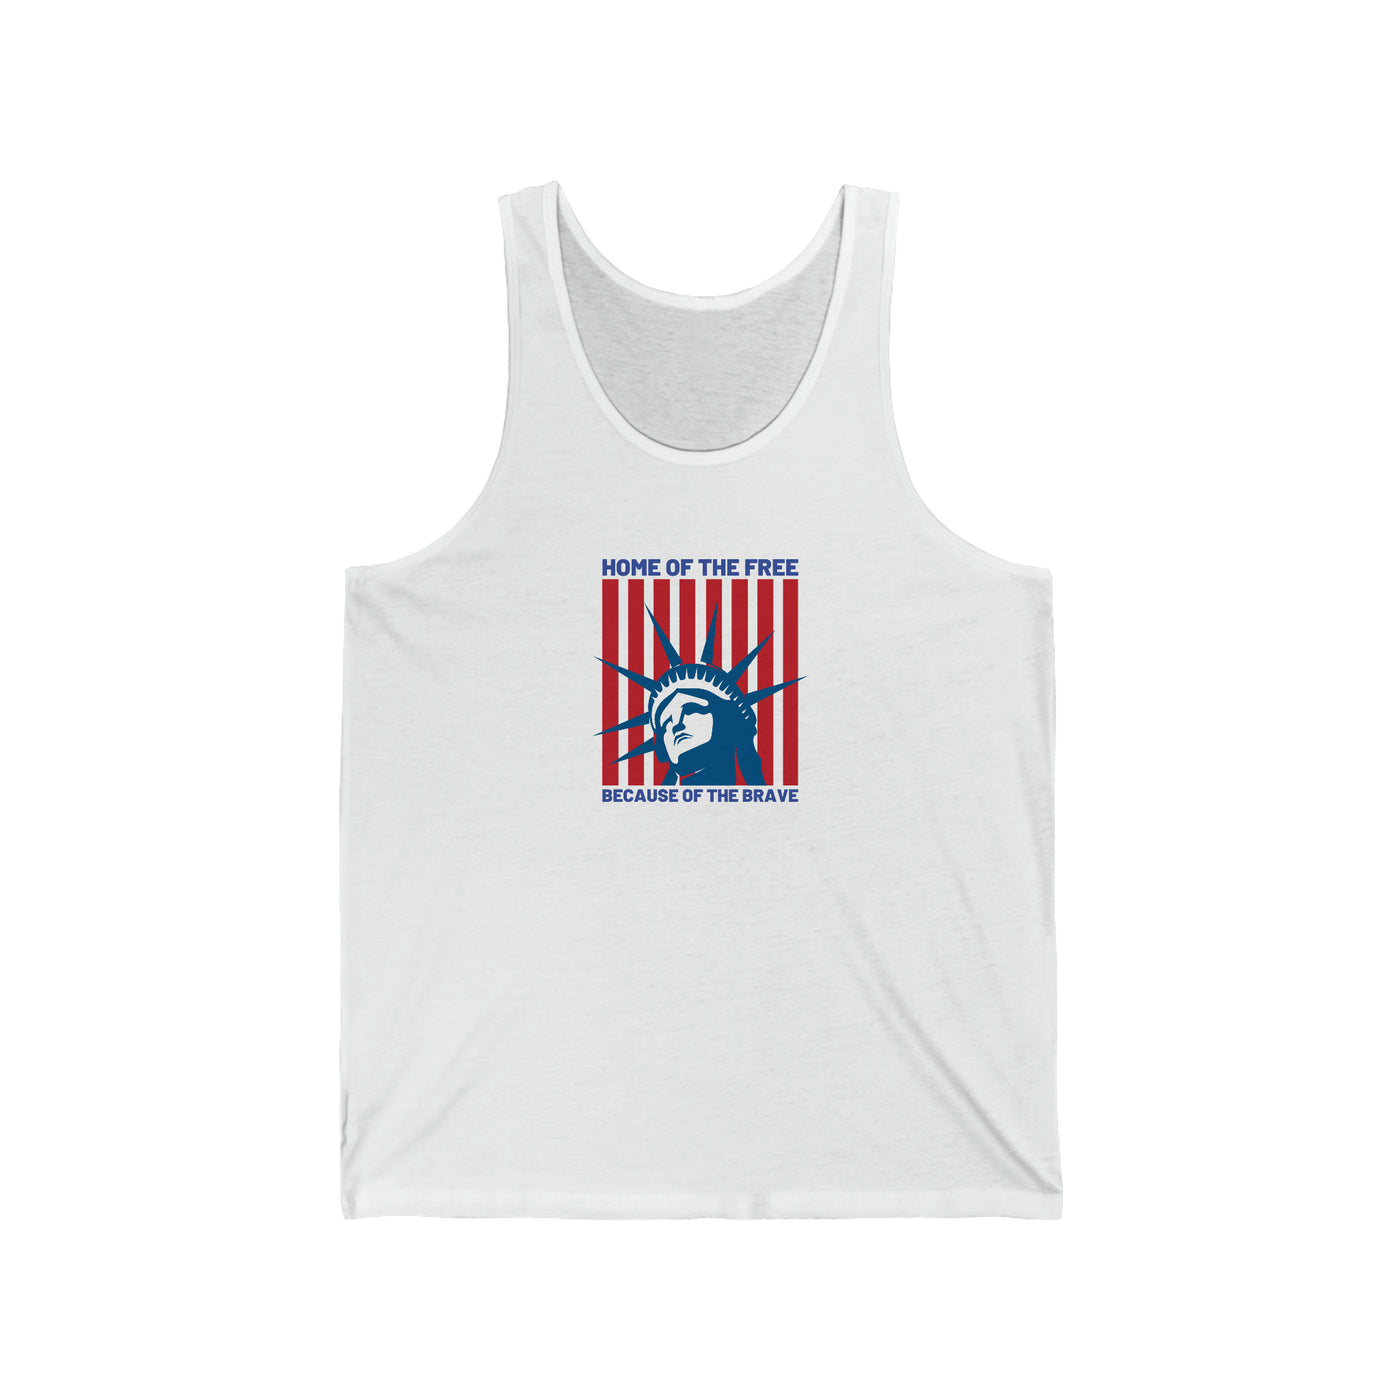 Home Of The Free Because Of The Brave Unisex Tank Top